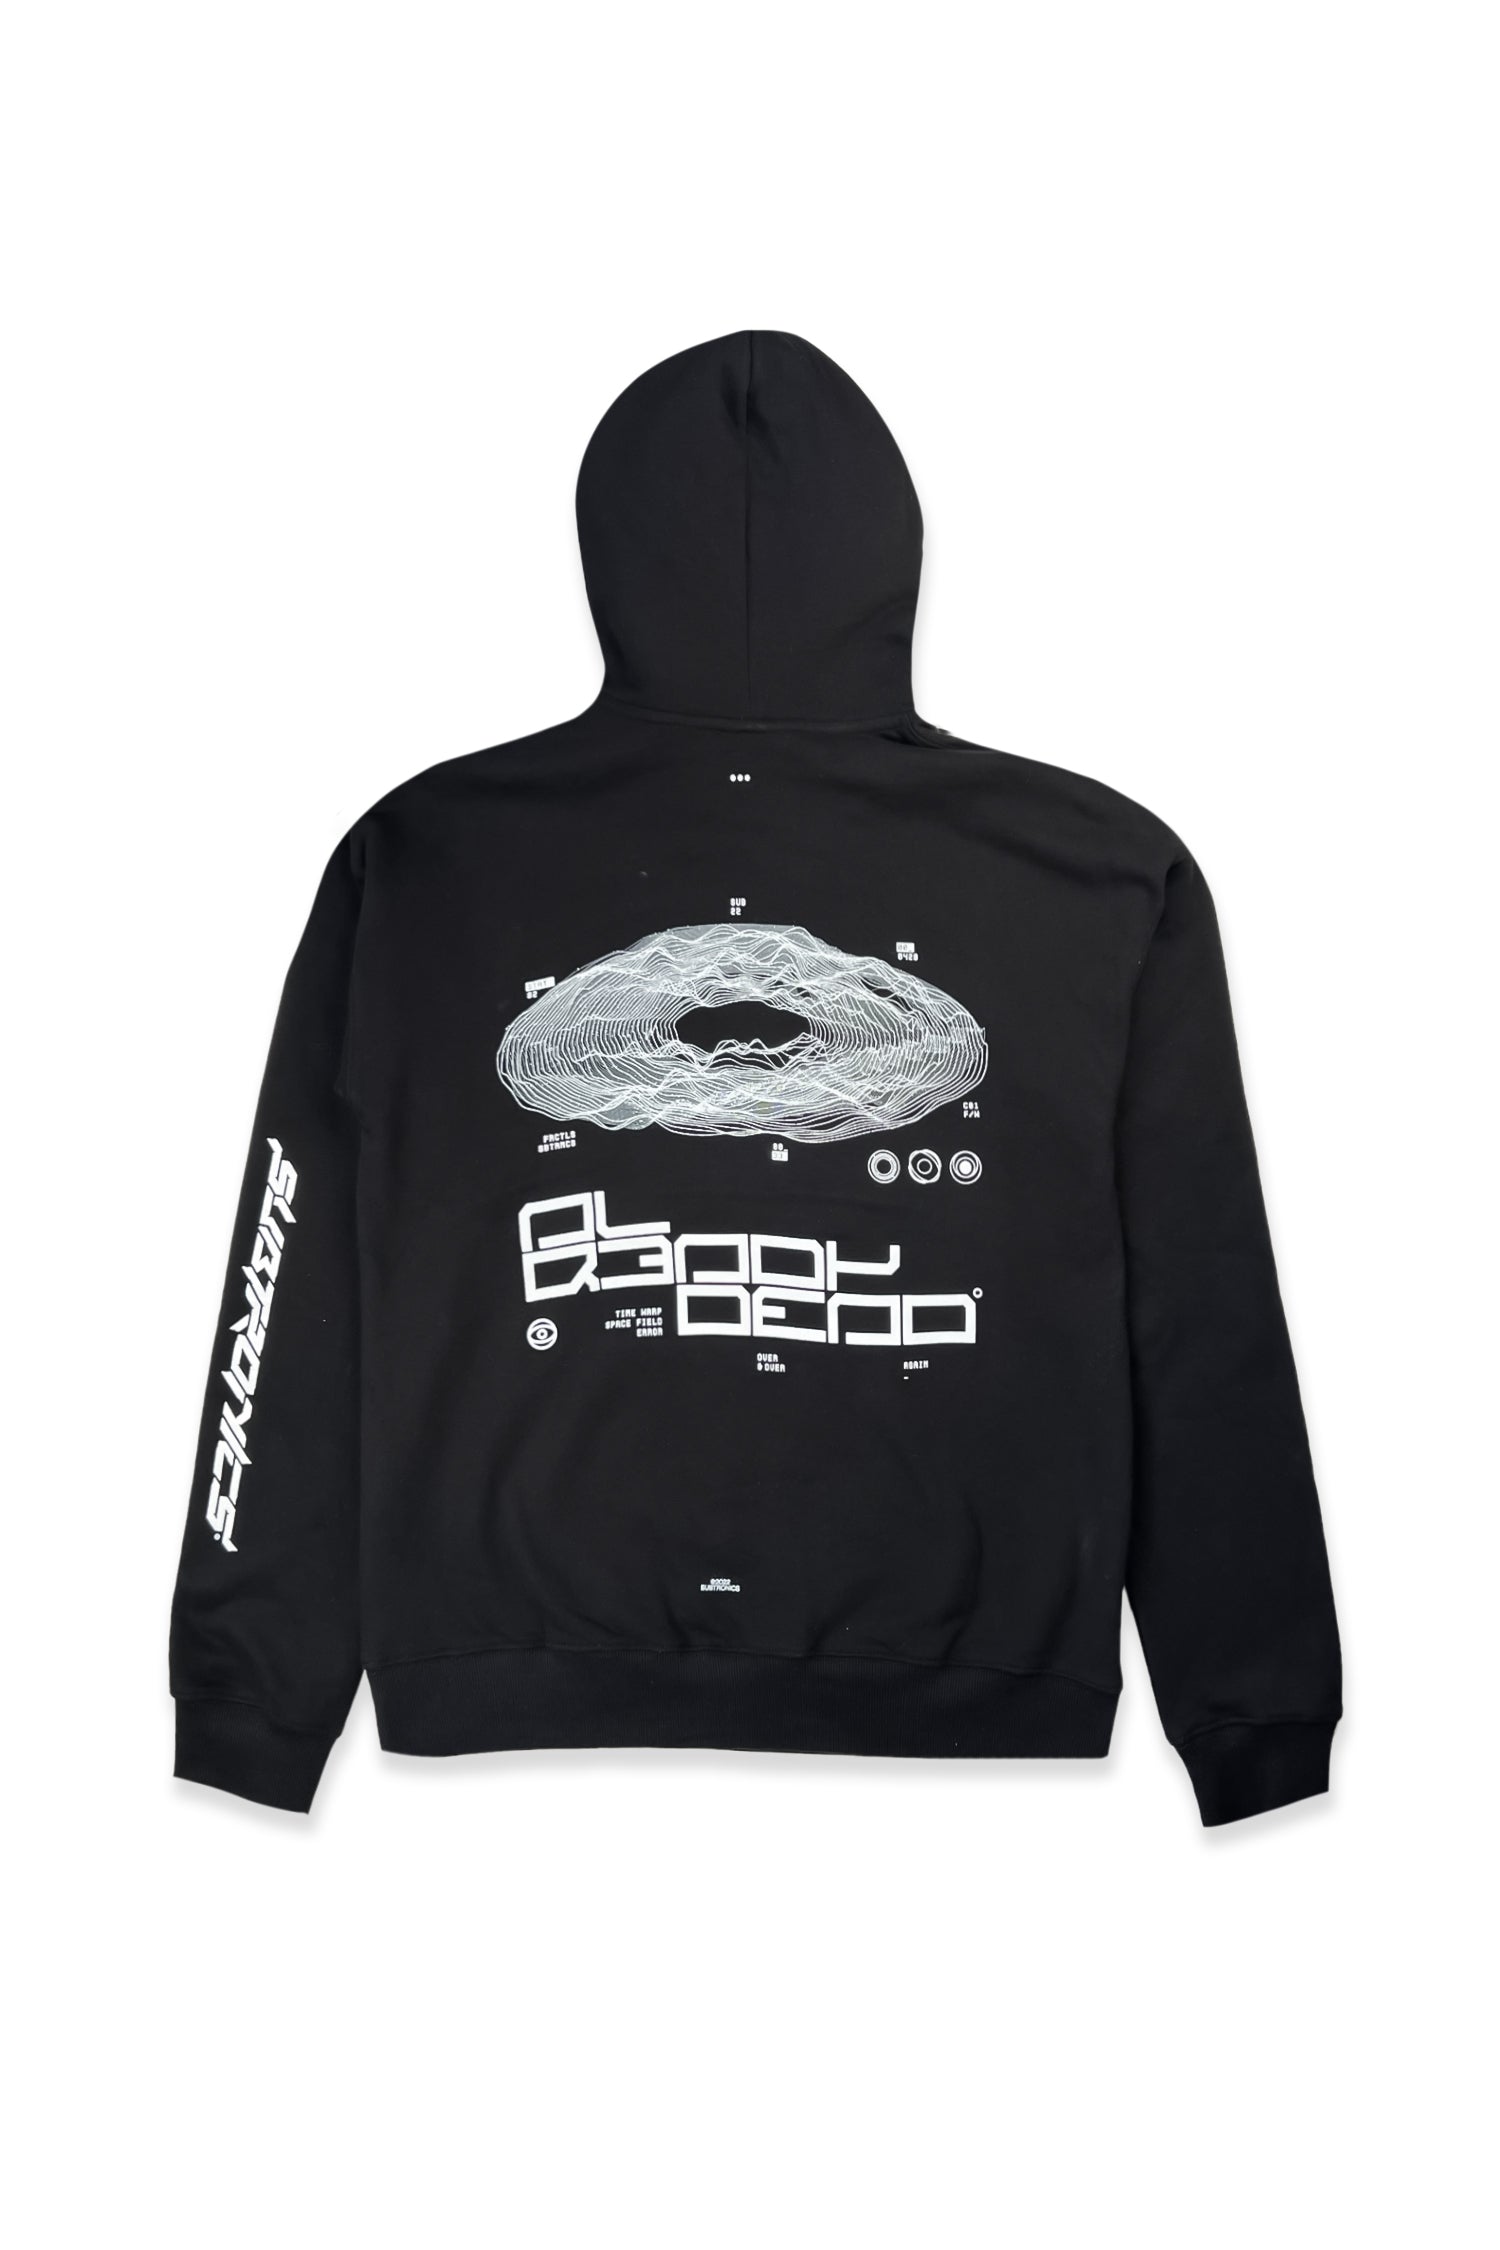 Subtronics Signature Collection - Space Field Hoodie